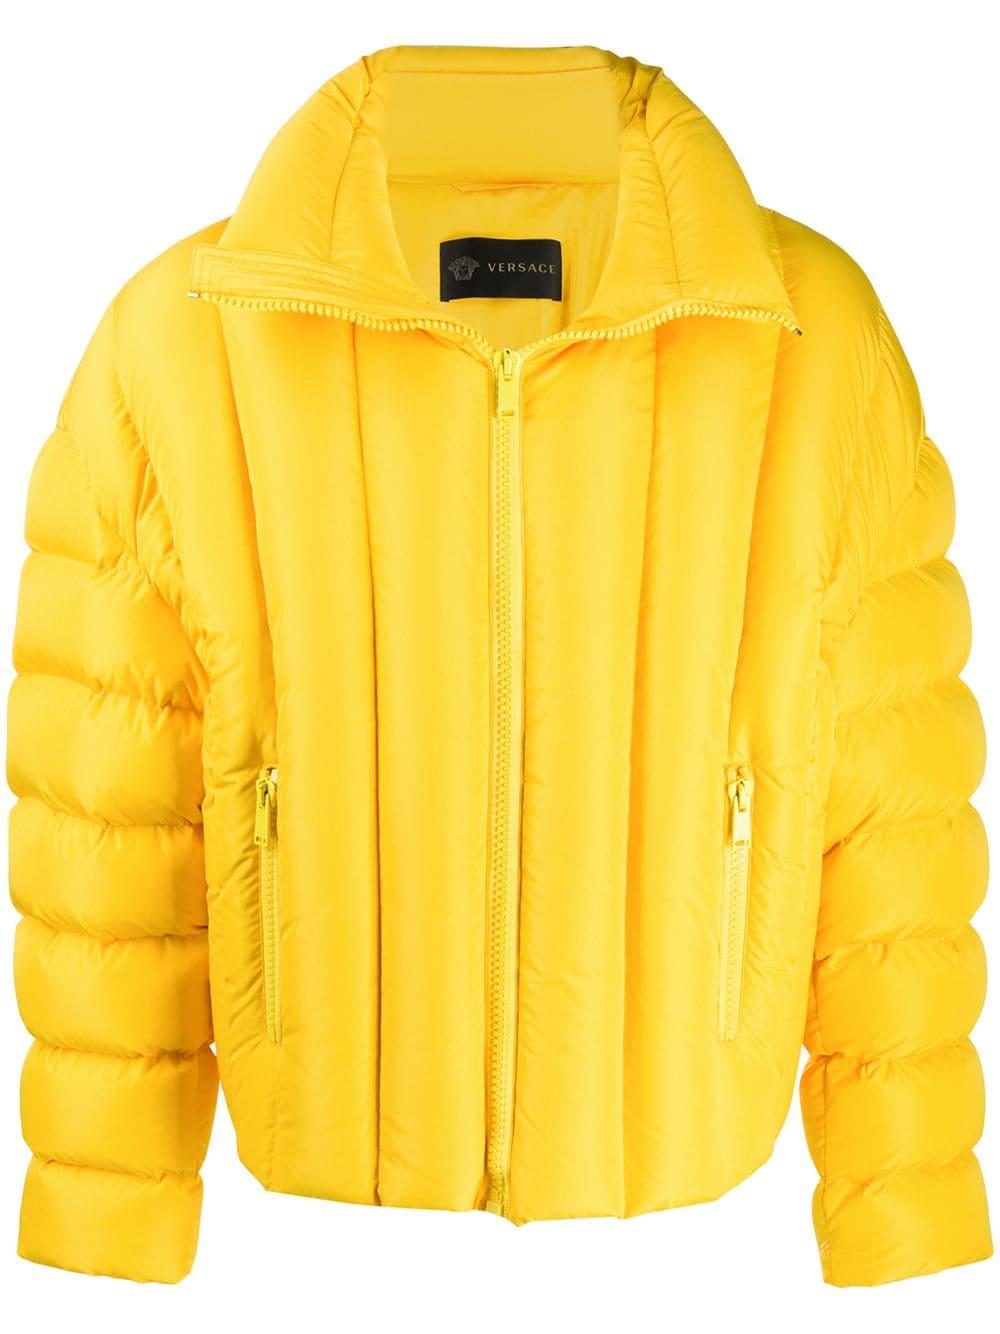 Versace Synthetic Quilted Logo Print Puffer Jacket in Yellow for Men - Lyst